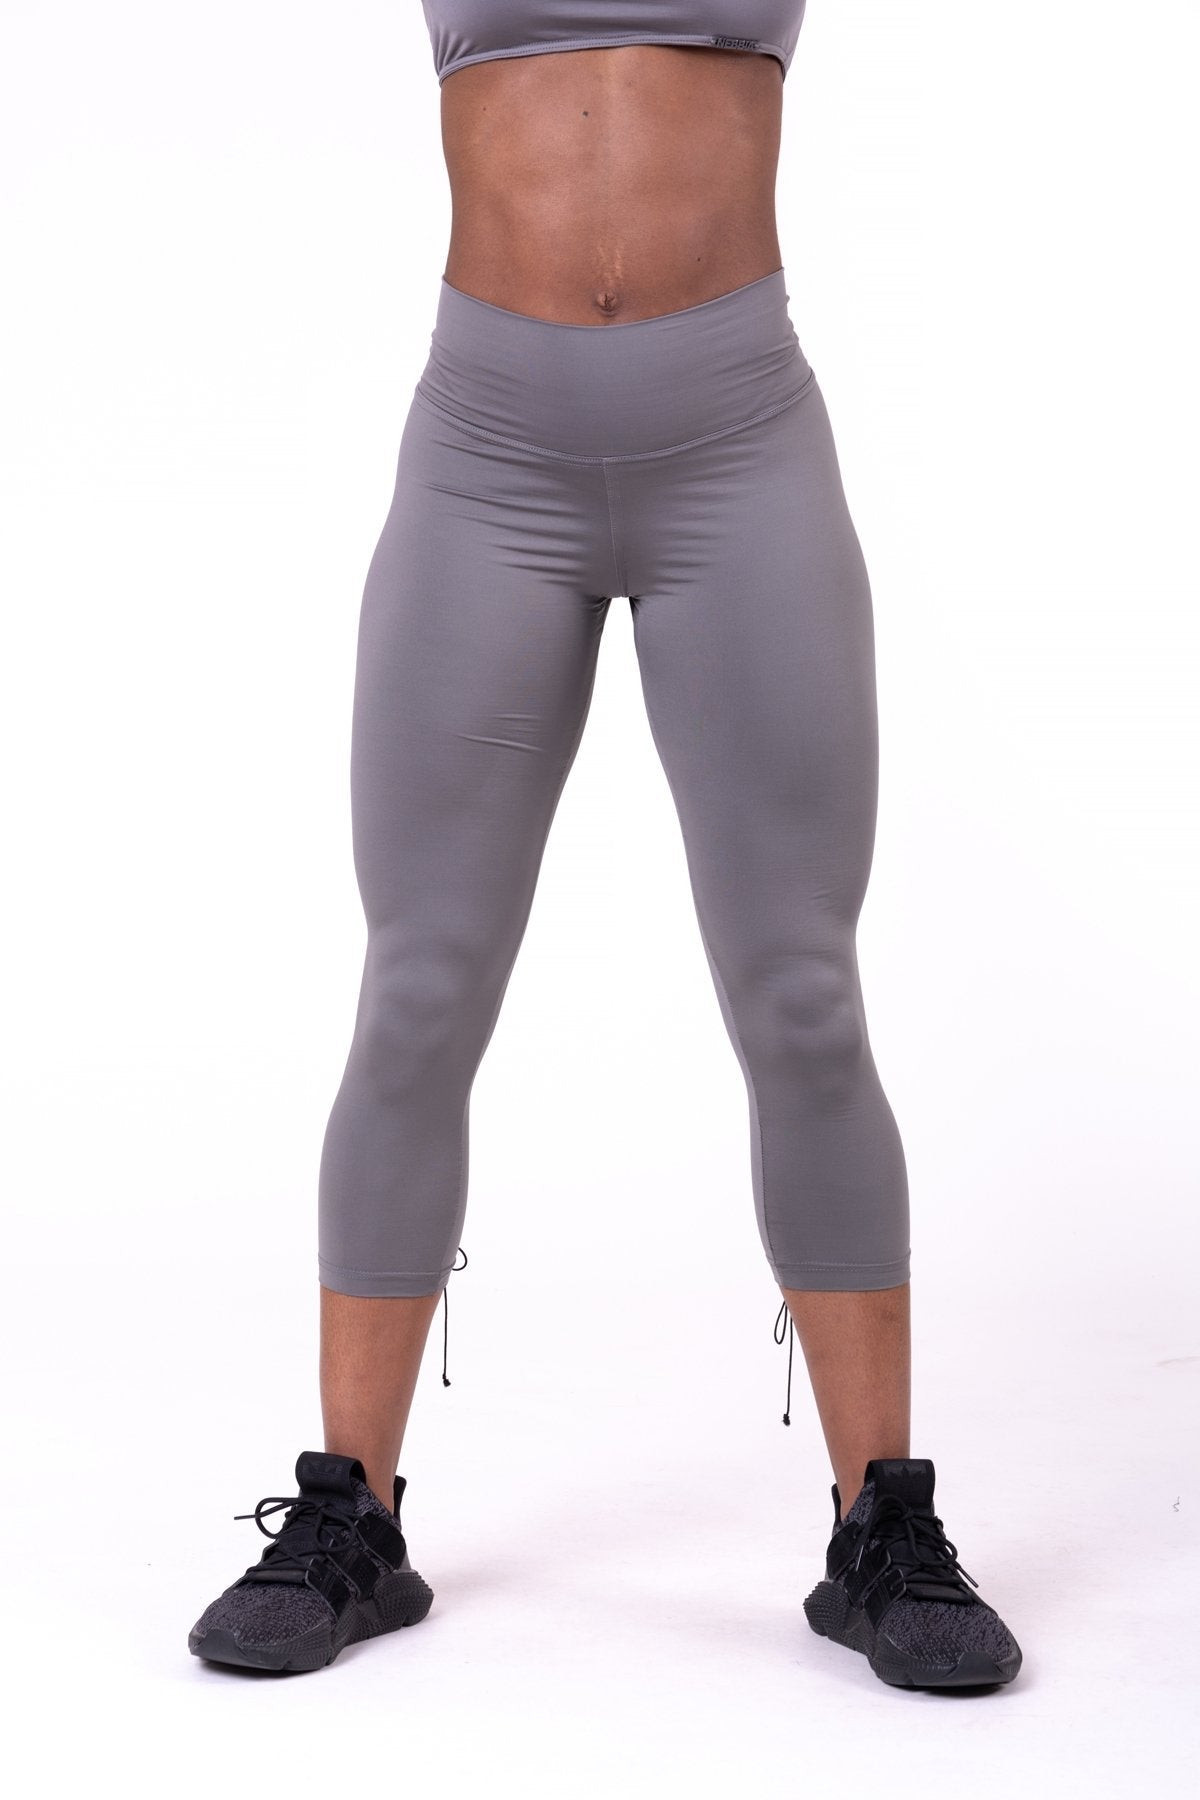 Nebbia - Lace it up! with these perfectly fitting 7/8 leggings